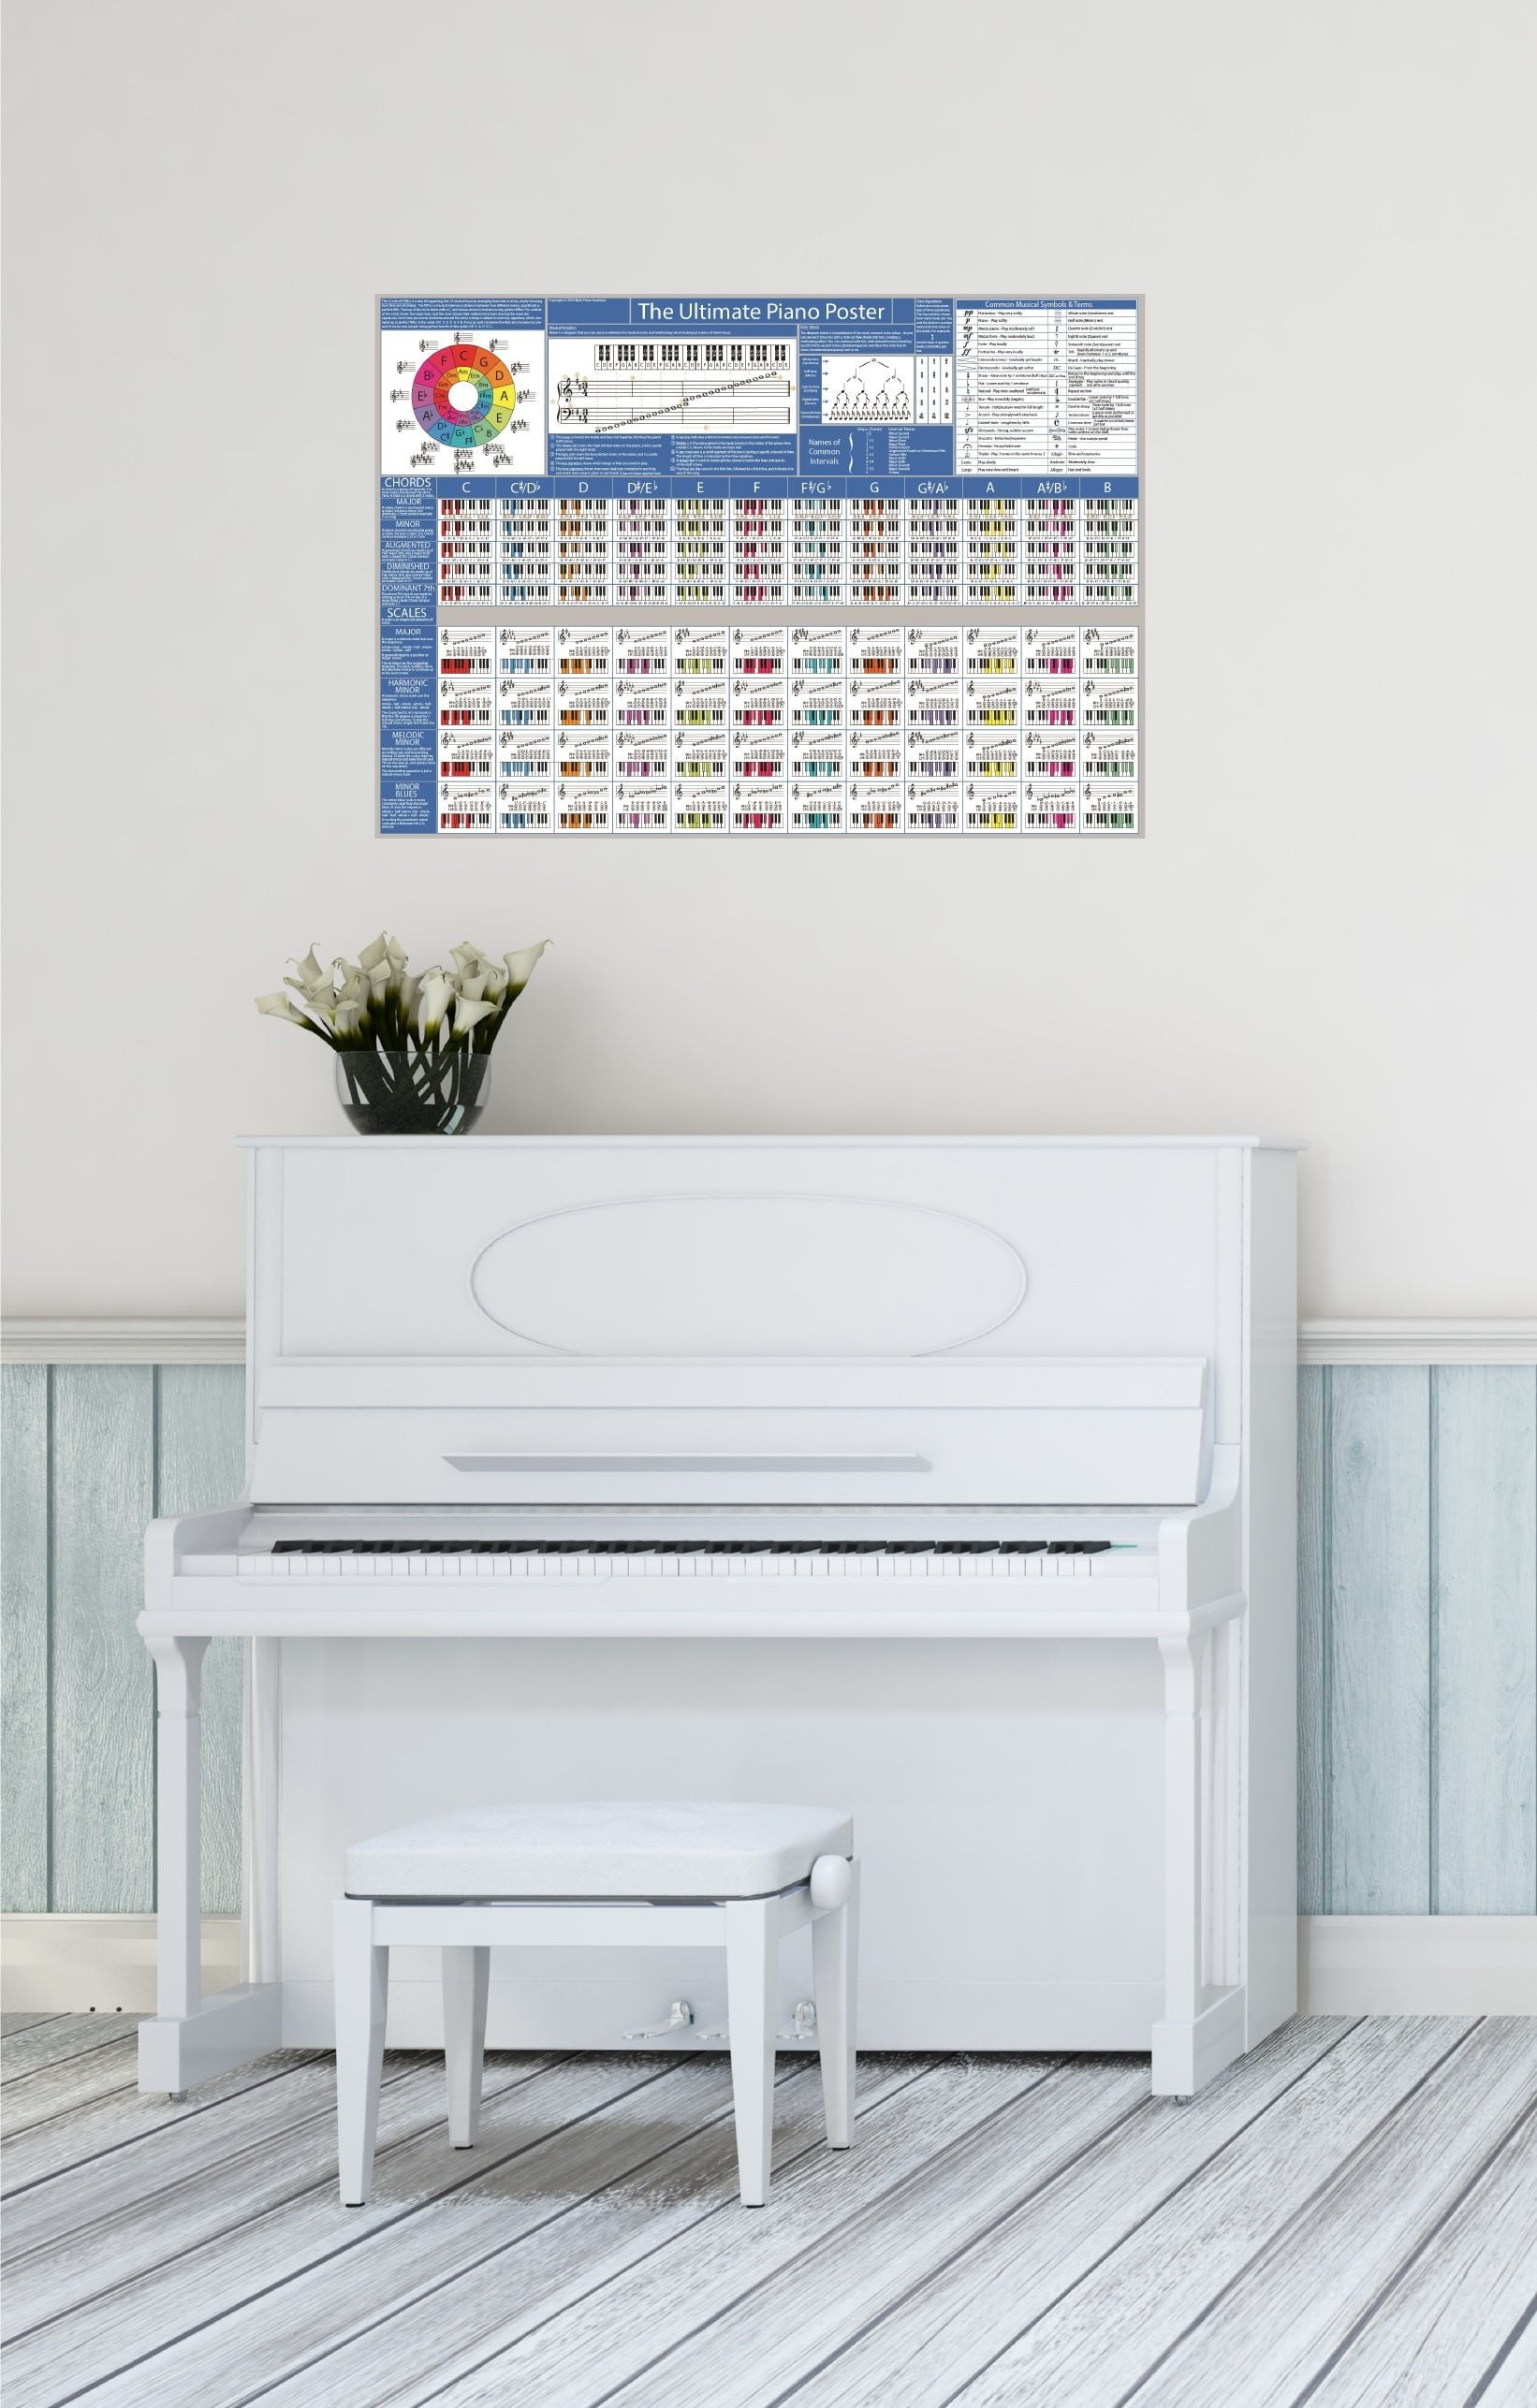 The Ultimate Piano Poster